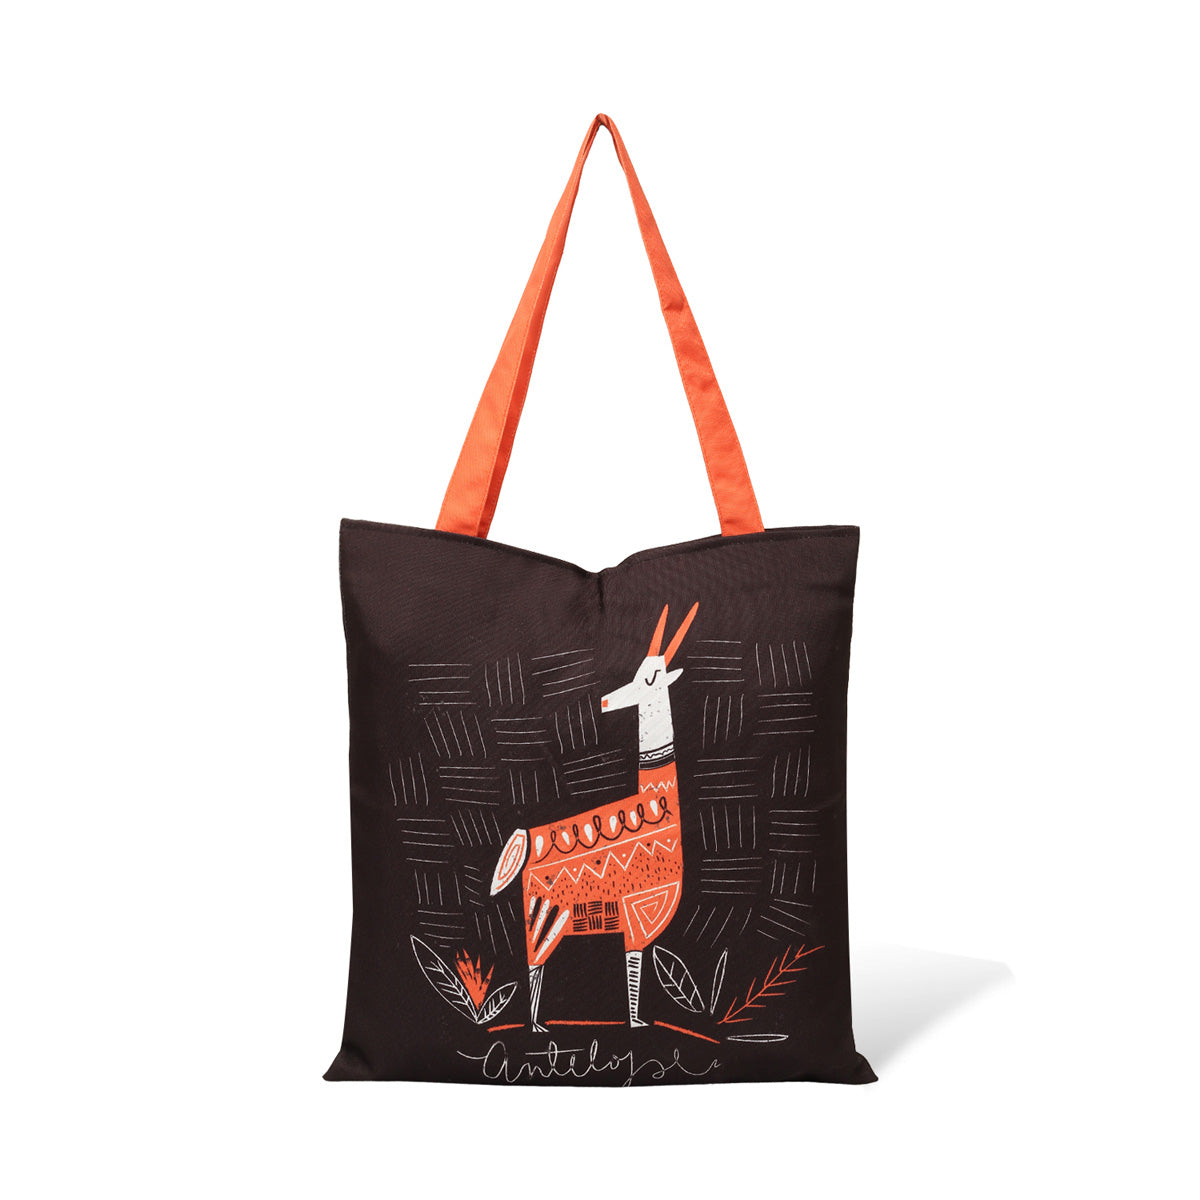 A black tote bag with orange handles featuring a stylized illustration of a white llama with orange patterns 